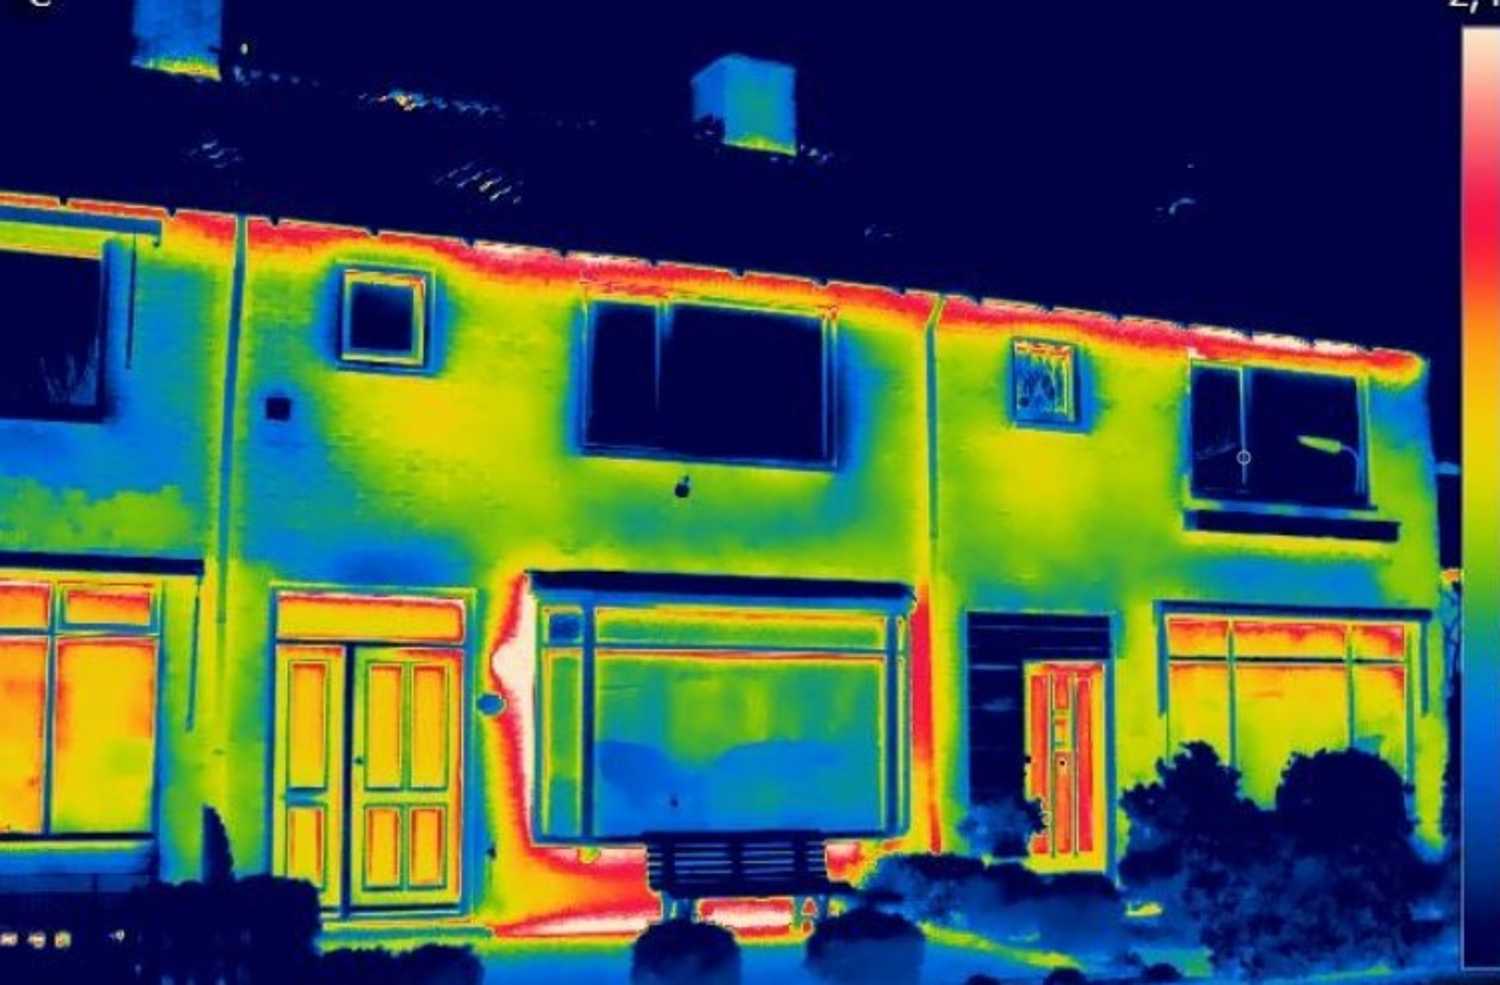 Thermographic image analysis to investigate heat loss in buildings